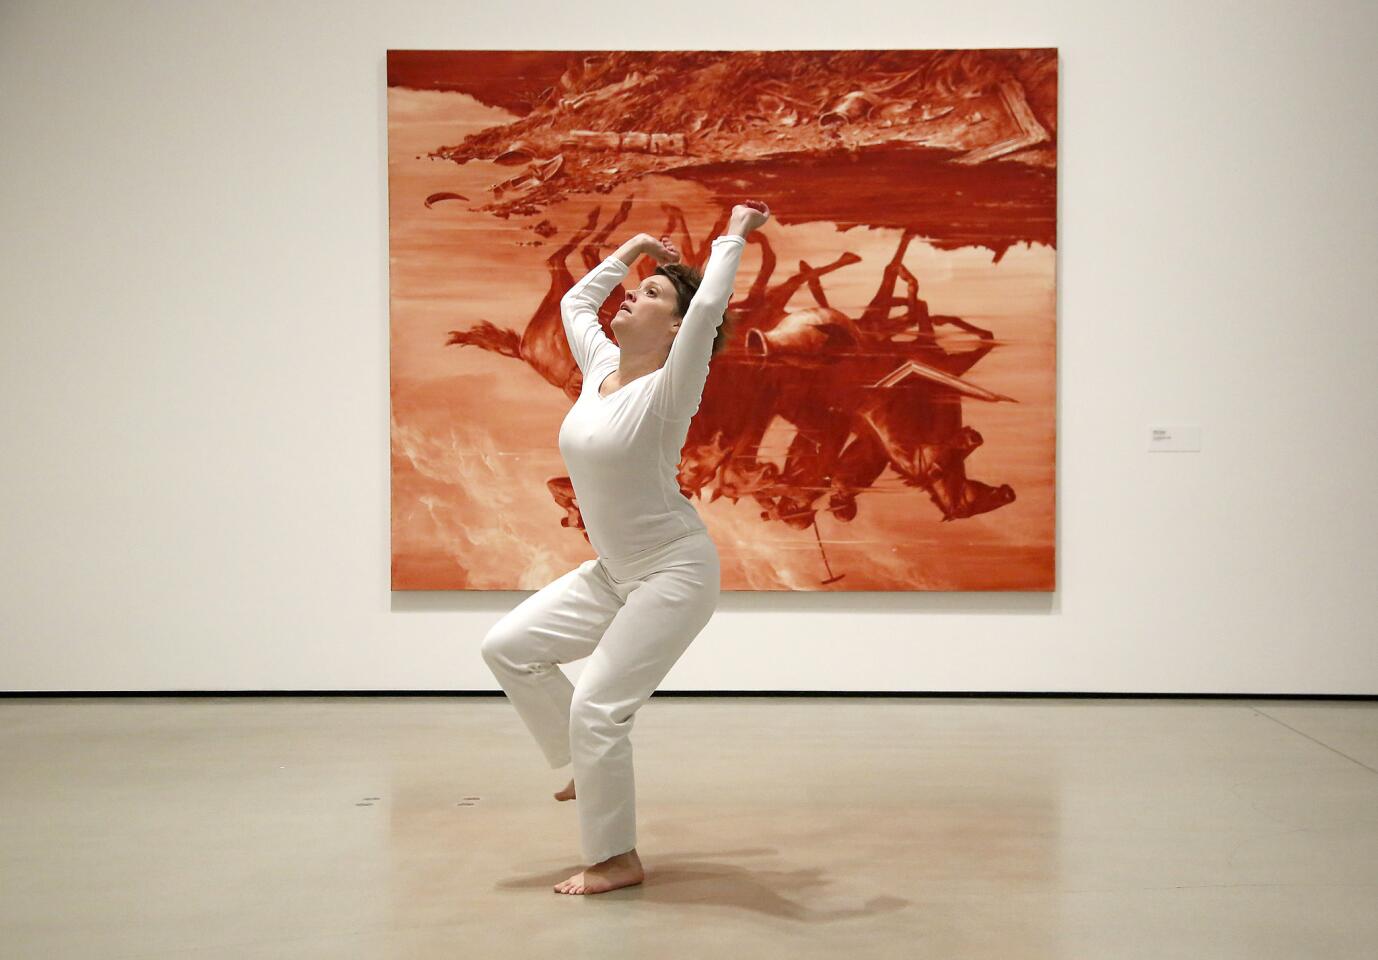 Dancers compete for hang time at the Broad Museum